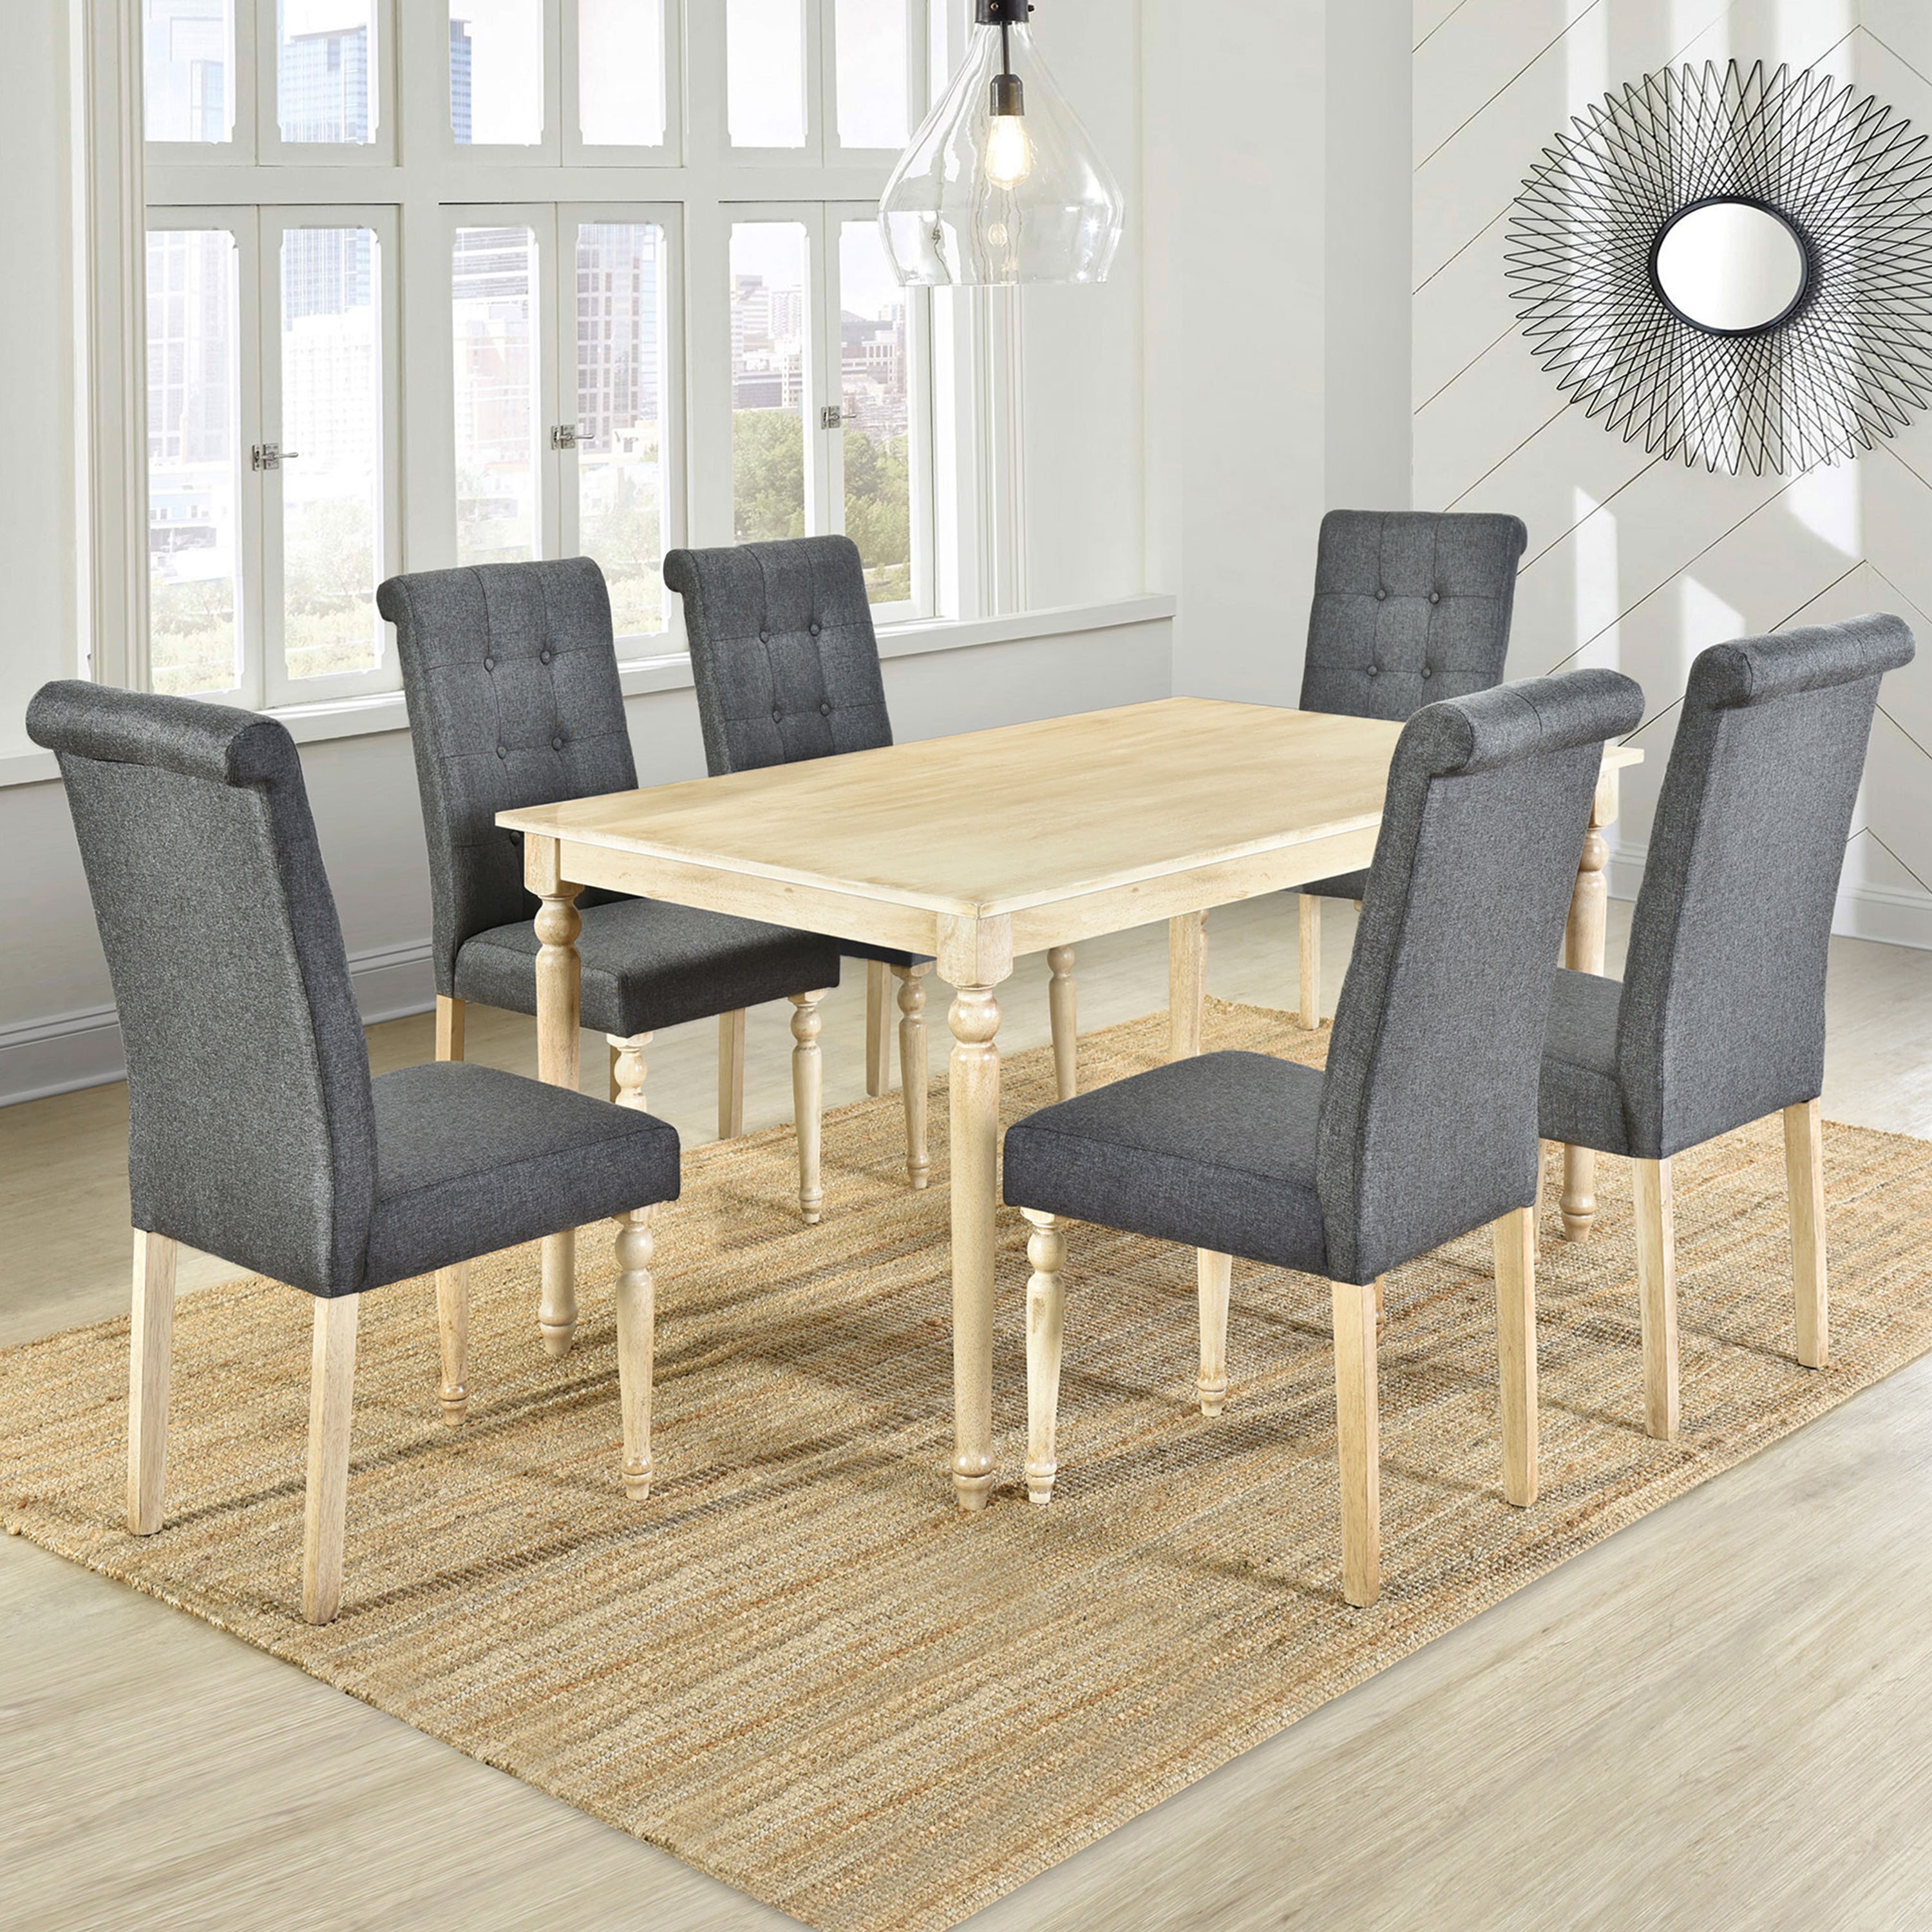 TOPMAX Set of 7 Wood Rectangular Dining Table Set with 6 High Back Upholstered Dining Chairs